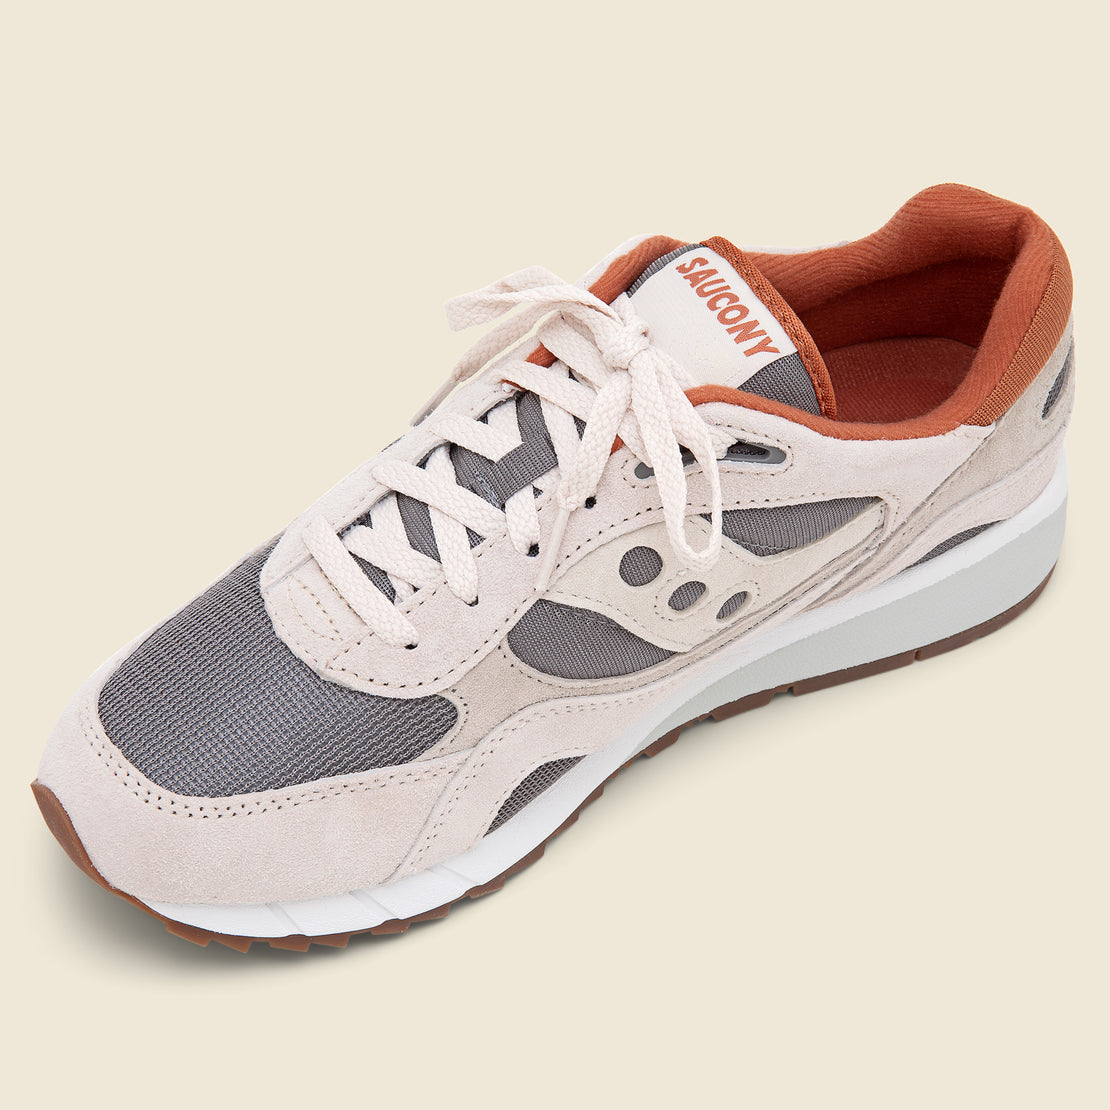 Shadow 6000 Sneaker - Beige/White/Orange - Saucony - STAG Provisions - Shoes - Athletic